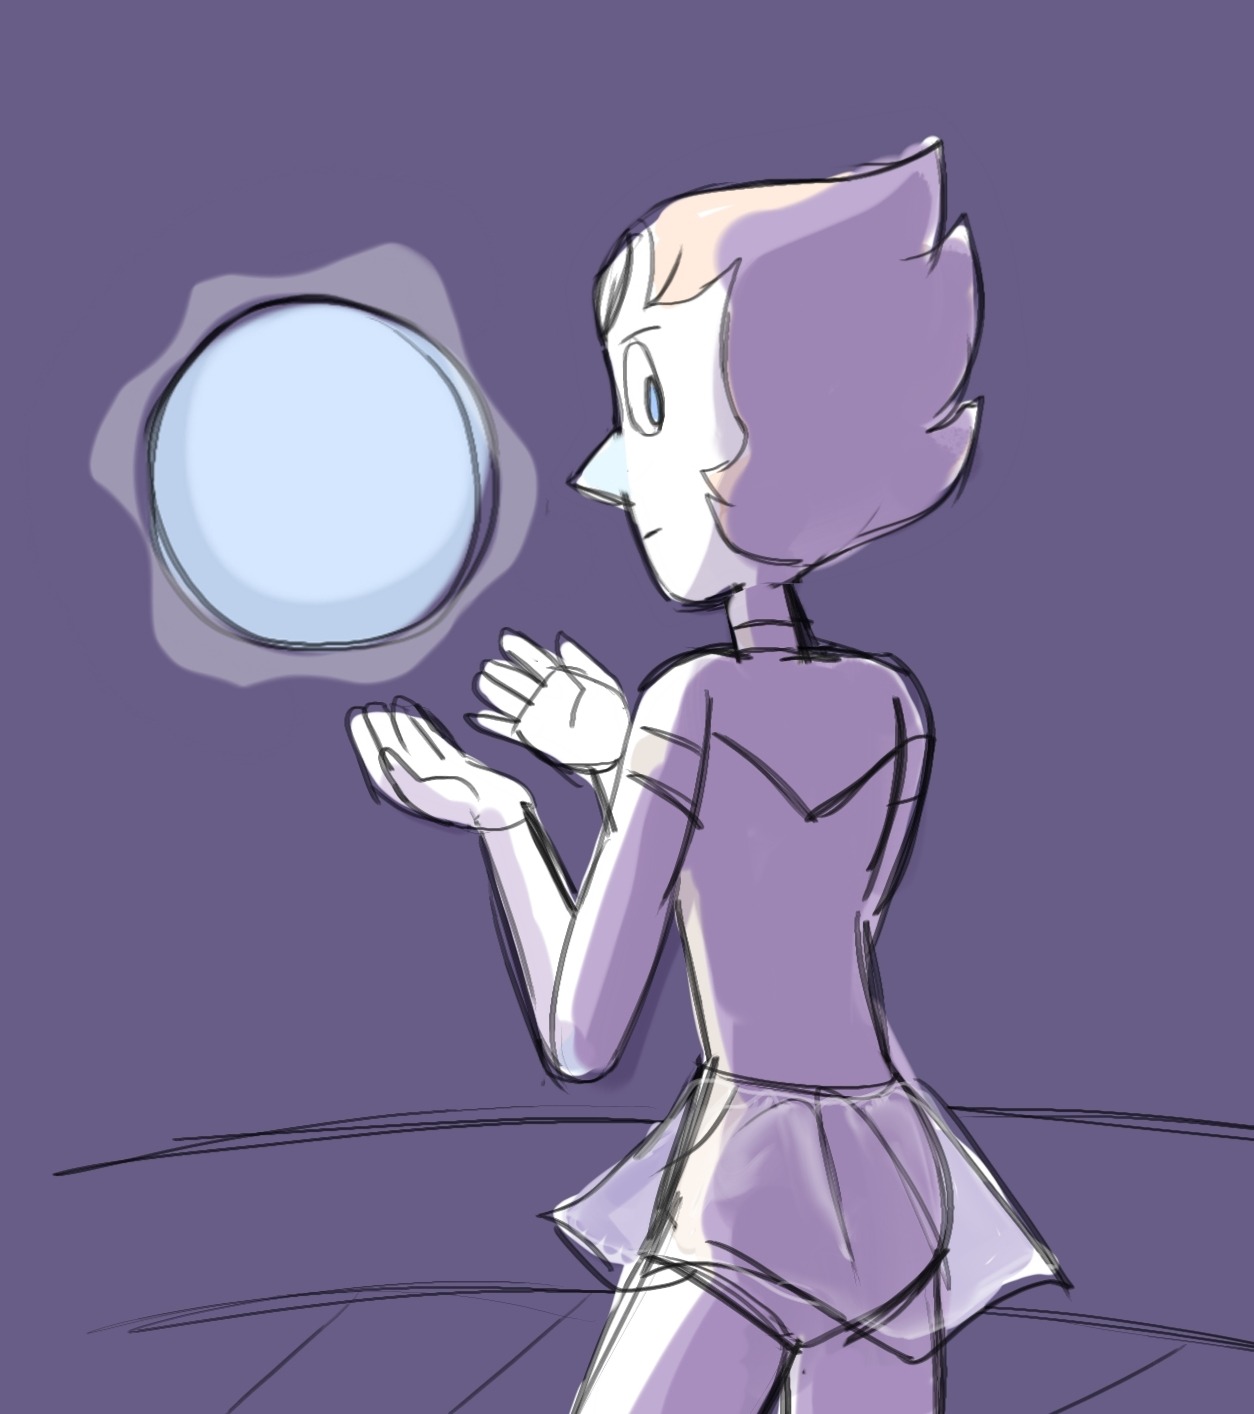 I was thinking about the Moon Sphere and what size it may actually be. I was thinking first on it being of a manageable size for the characters to hold… but there are the theories about it being the...